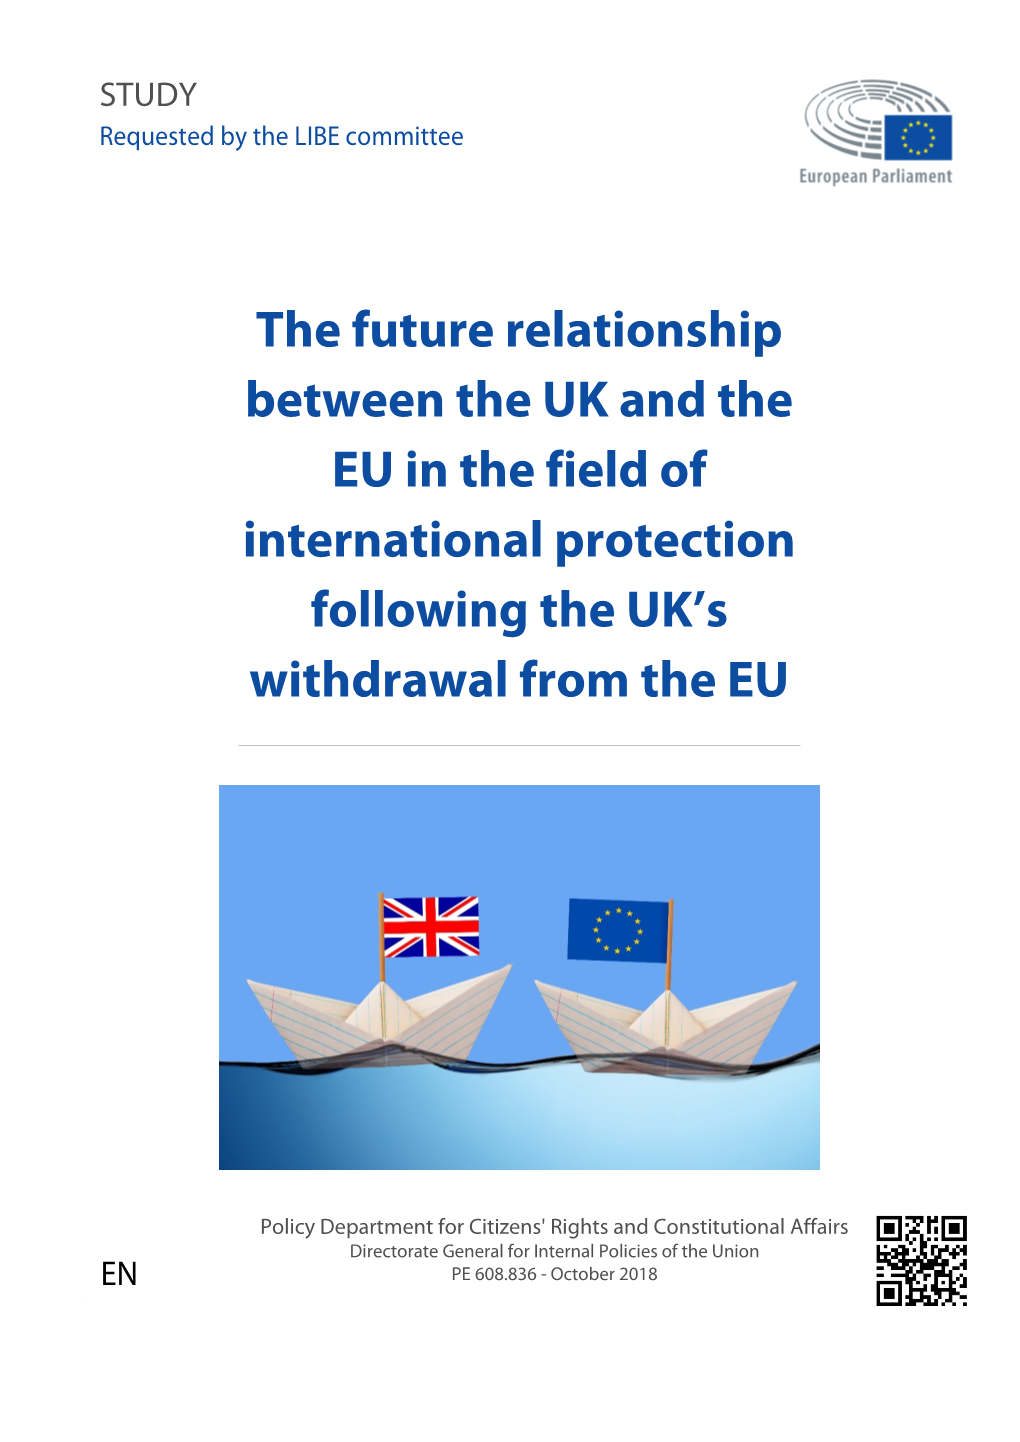 The Future Relationship Between the UK and the EU in the Field of International Protection Following the UK's Withdrawal From